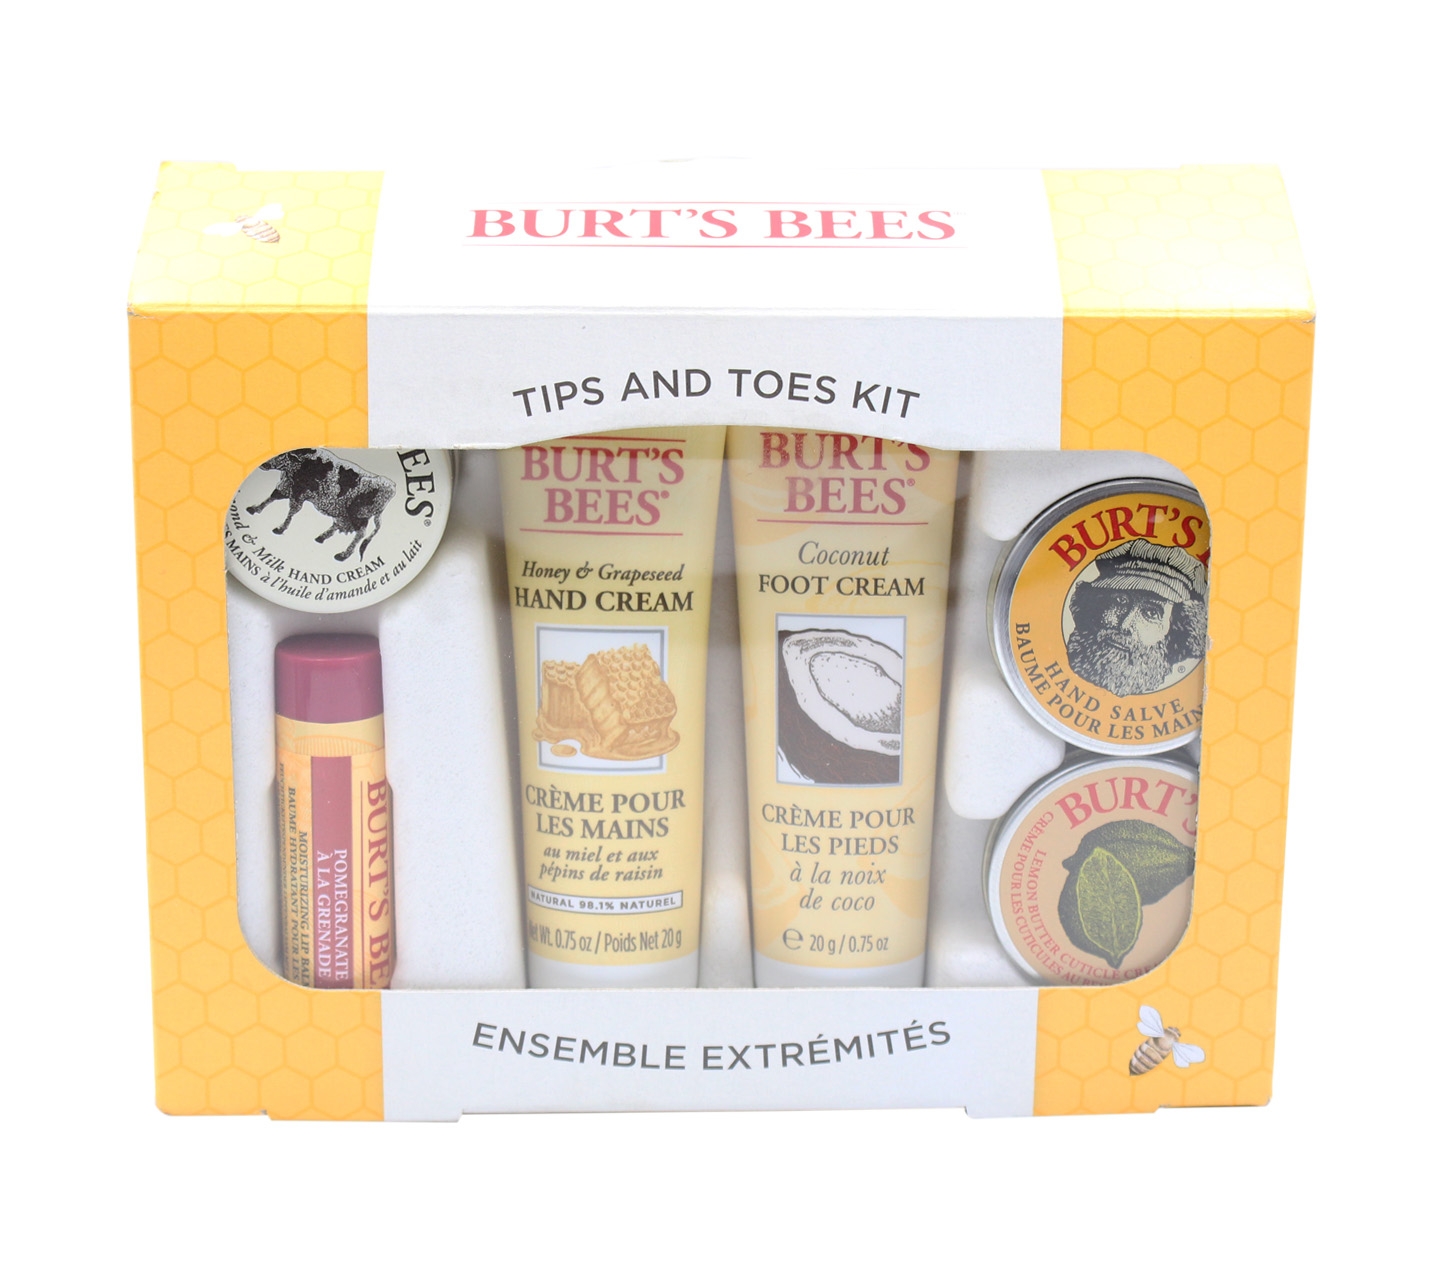 Burts Bees Tips And Toes Kit Sets and Palette